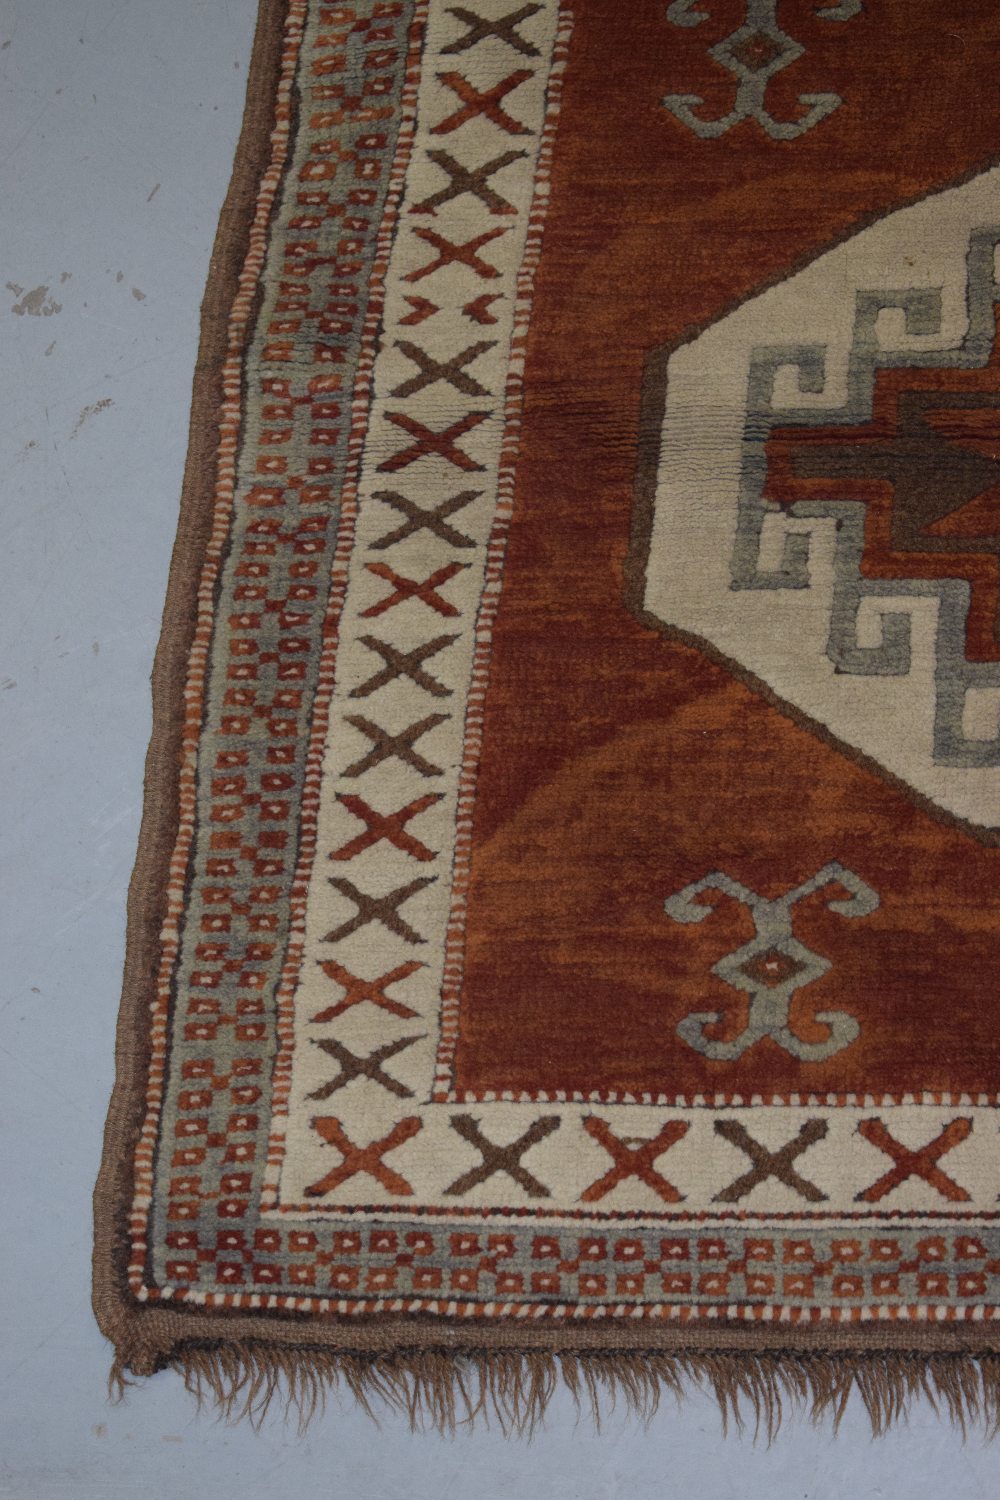 Two Anatolian rugs, the first: Konya kelim, central Anatolia, circa 1940s-50s, 4ft. 11in. X 3ft. - Image 14 of 17